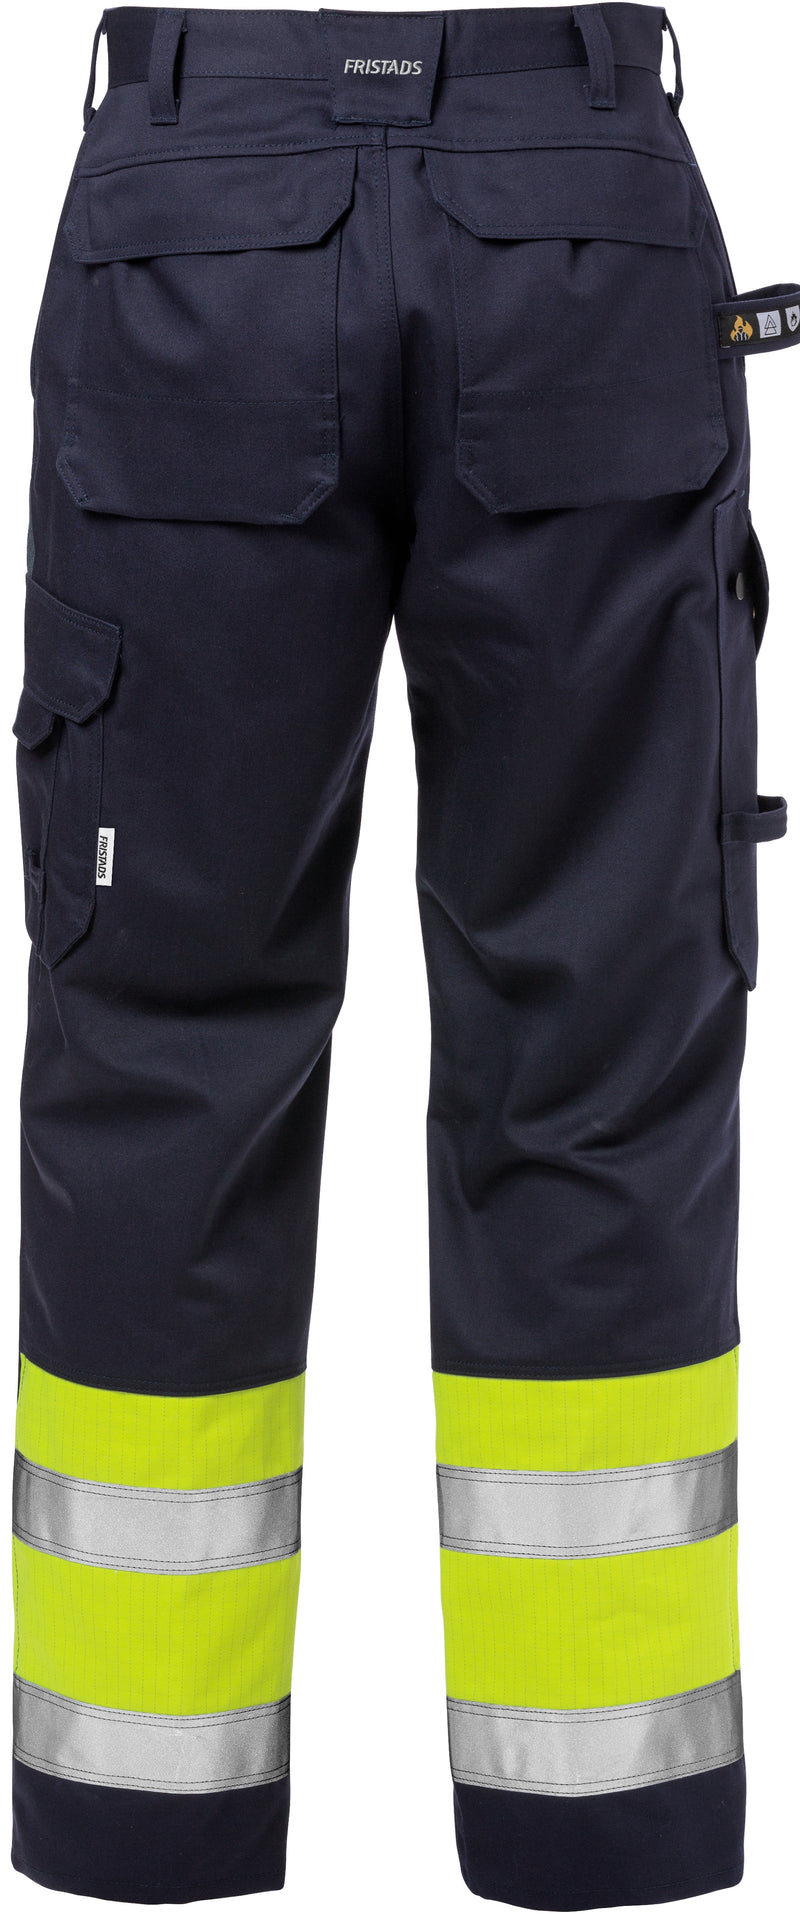 Load image into Gallery viewer, Trousers FRISTADS FLAME HIGH VIS TROUSERS CLASS 1 2587 FLAM
